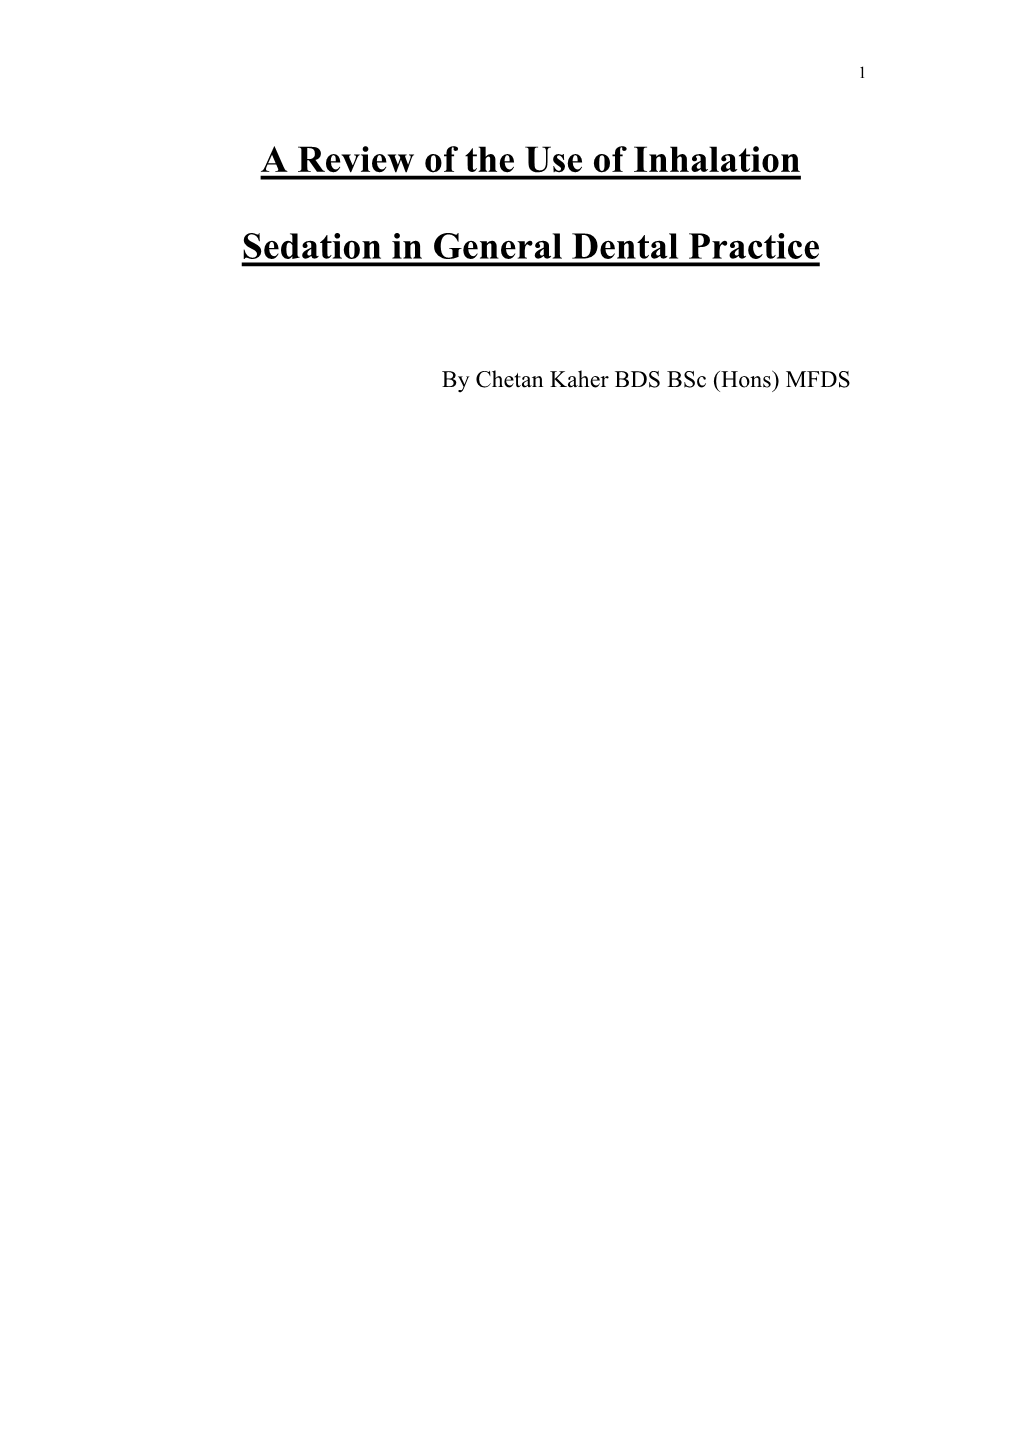 A Review of the Use of Inhalation Sedation in General Dental Practice